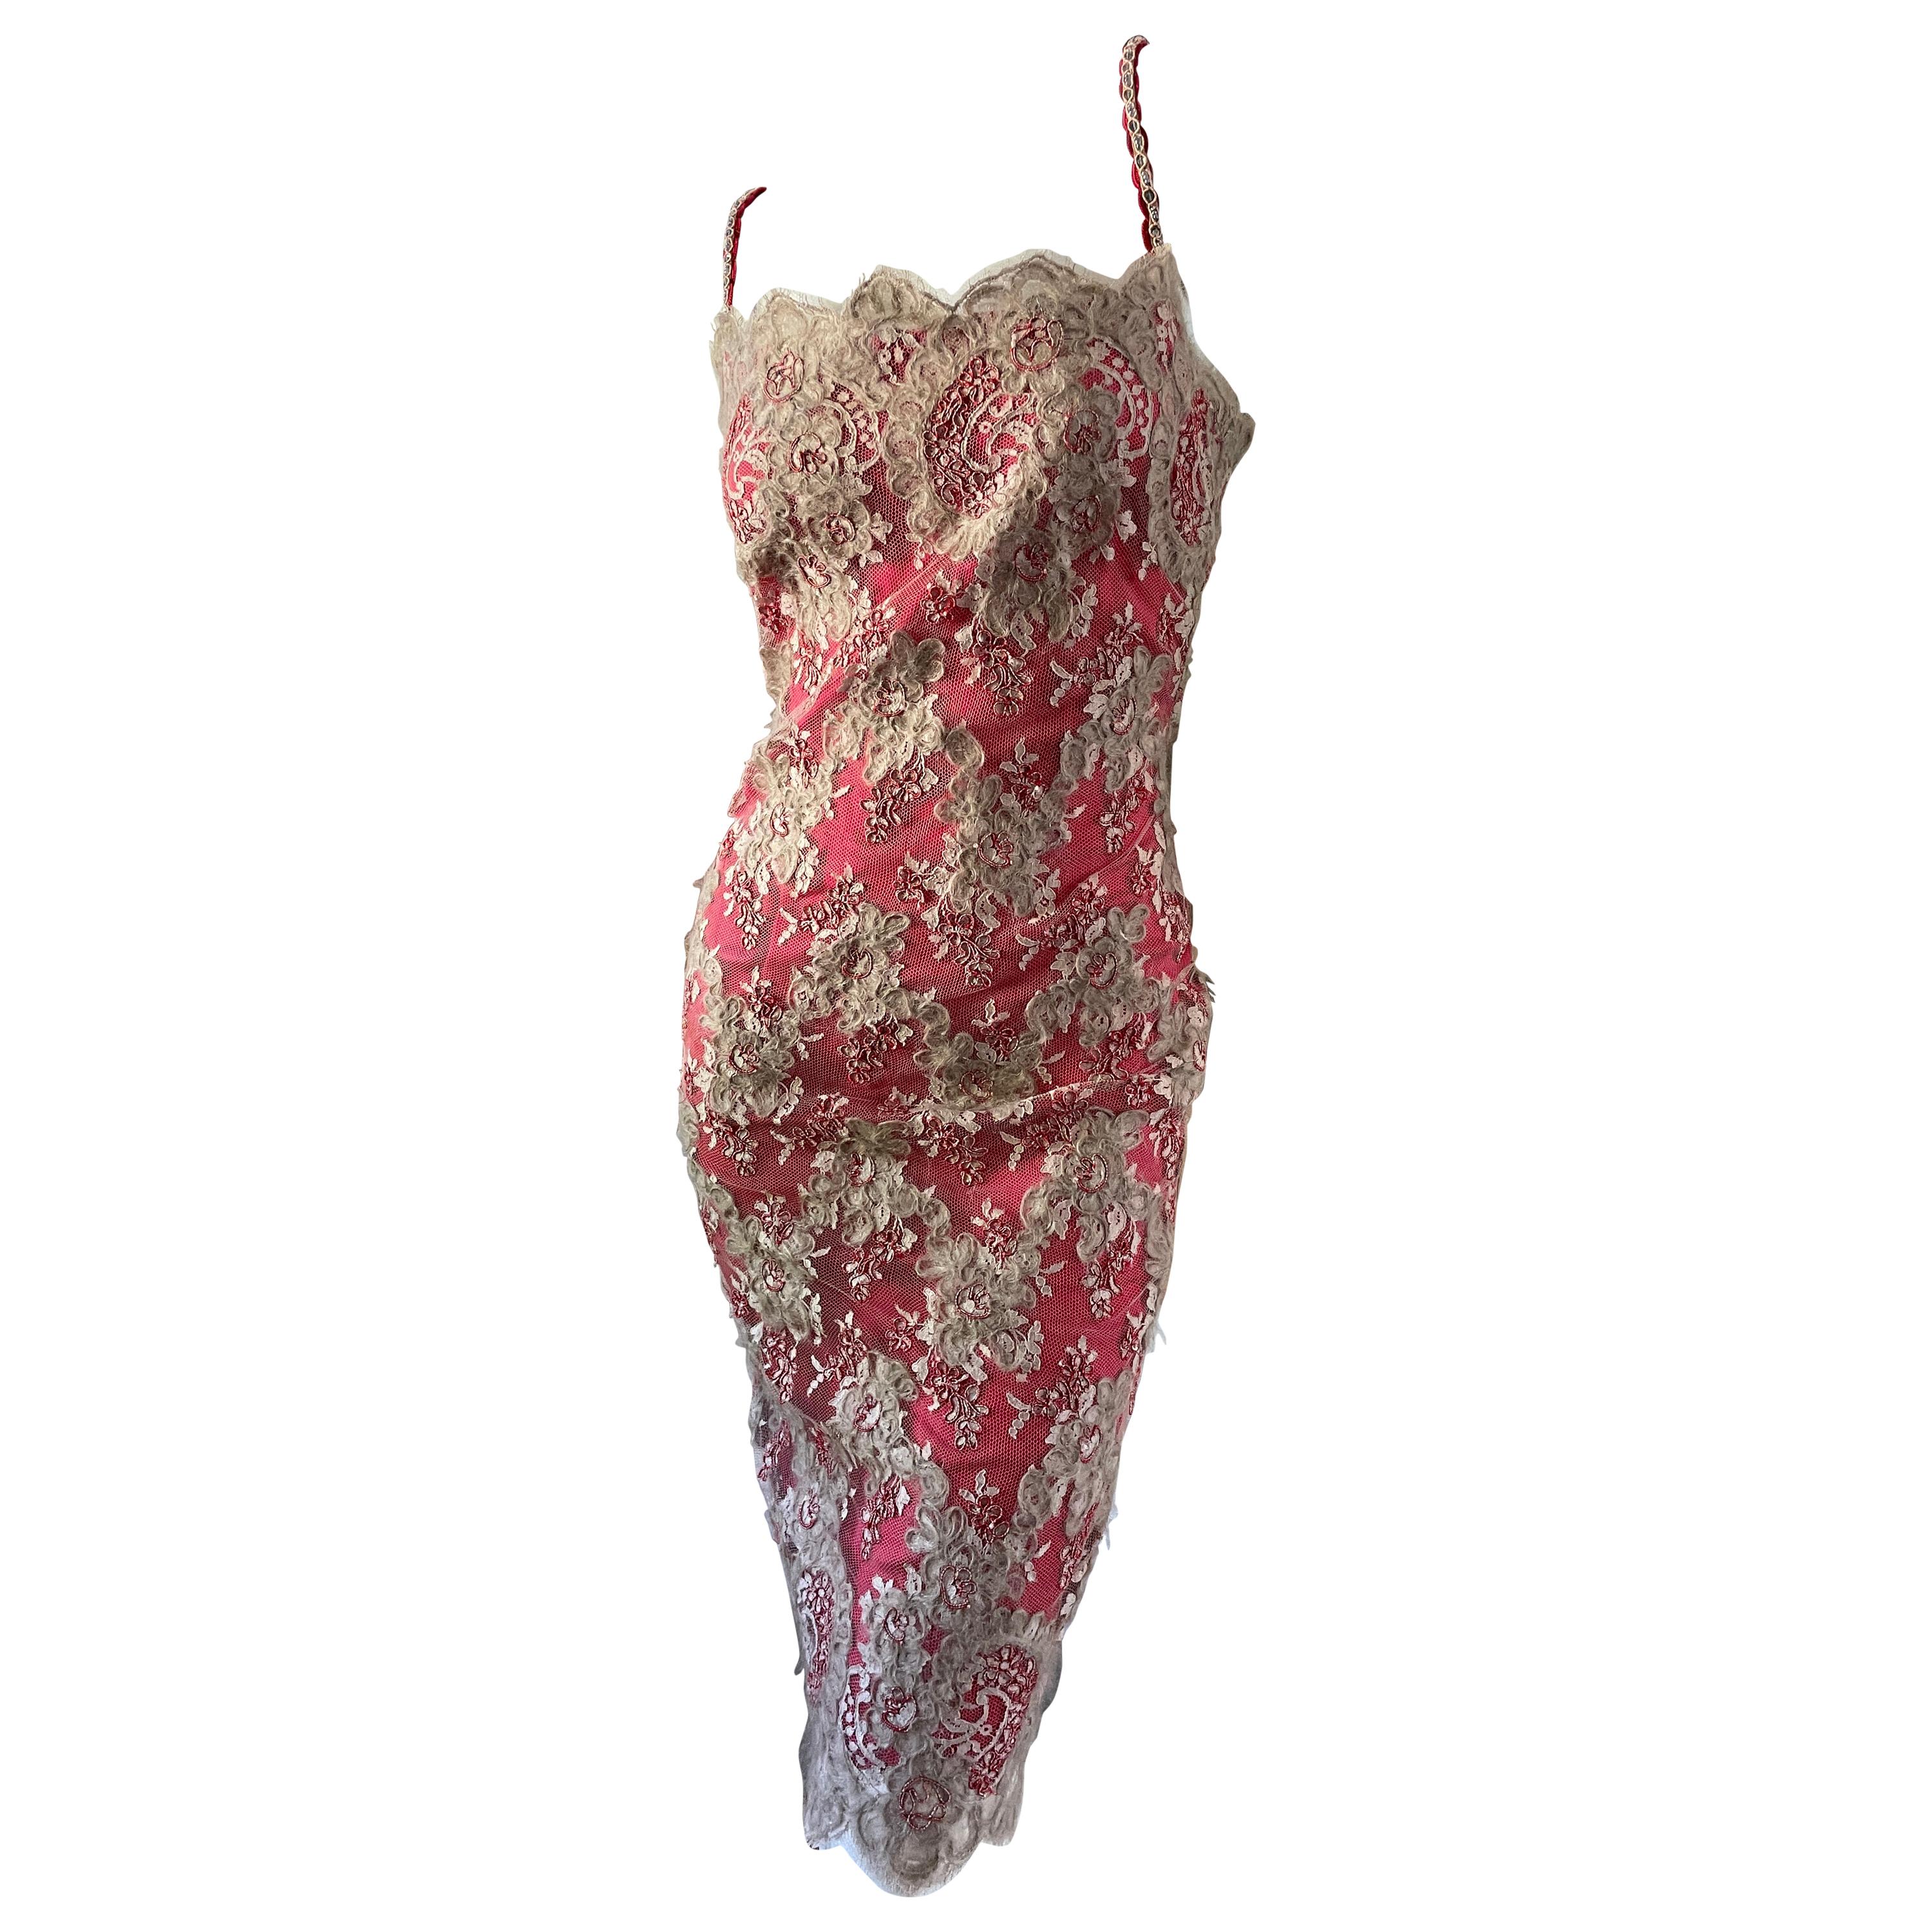 Bill Blass for Bergdorf Goodman Vintage Pink Embellished Lace Cocktail Dress NWT For Sale